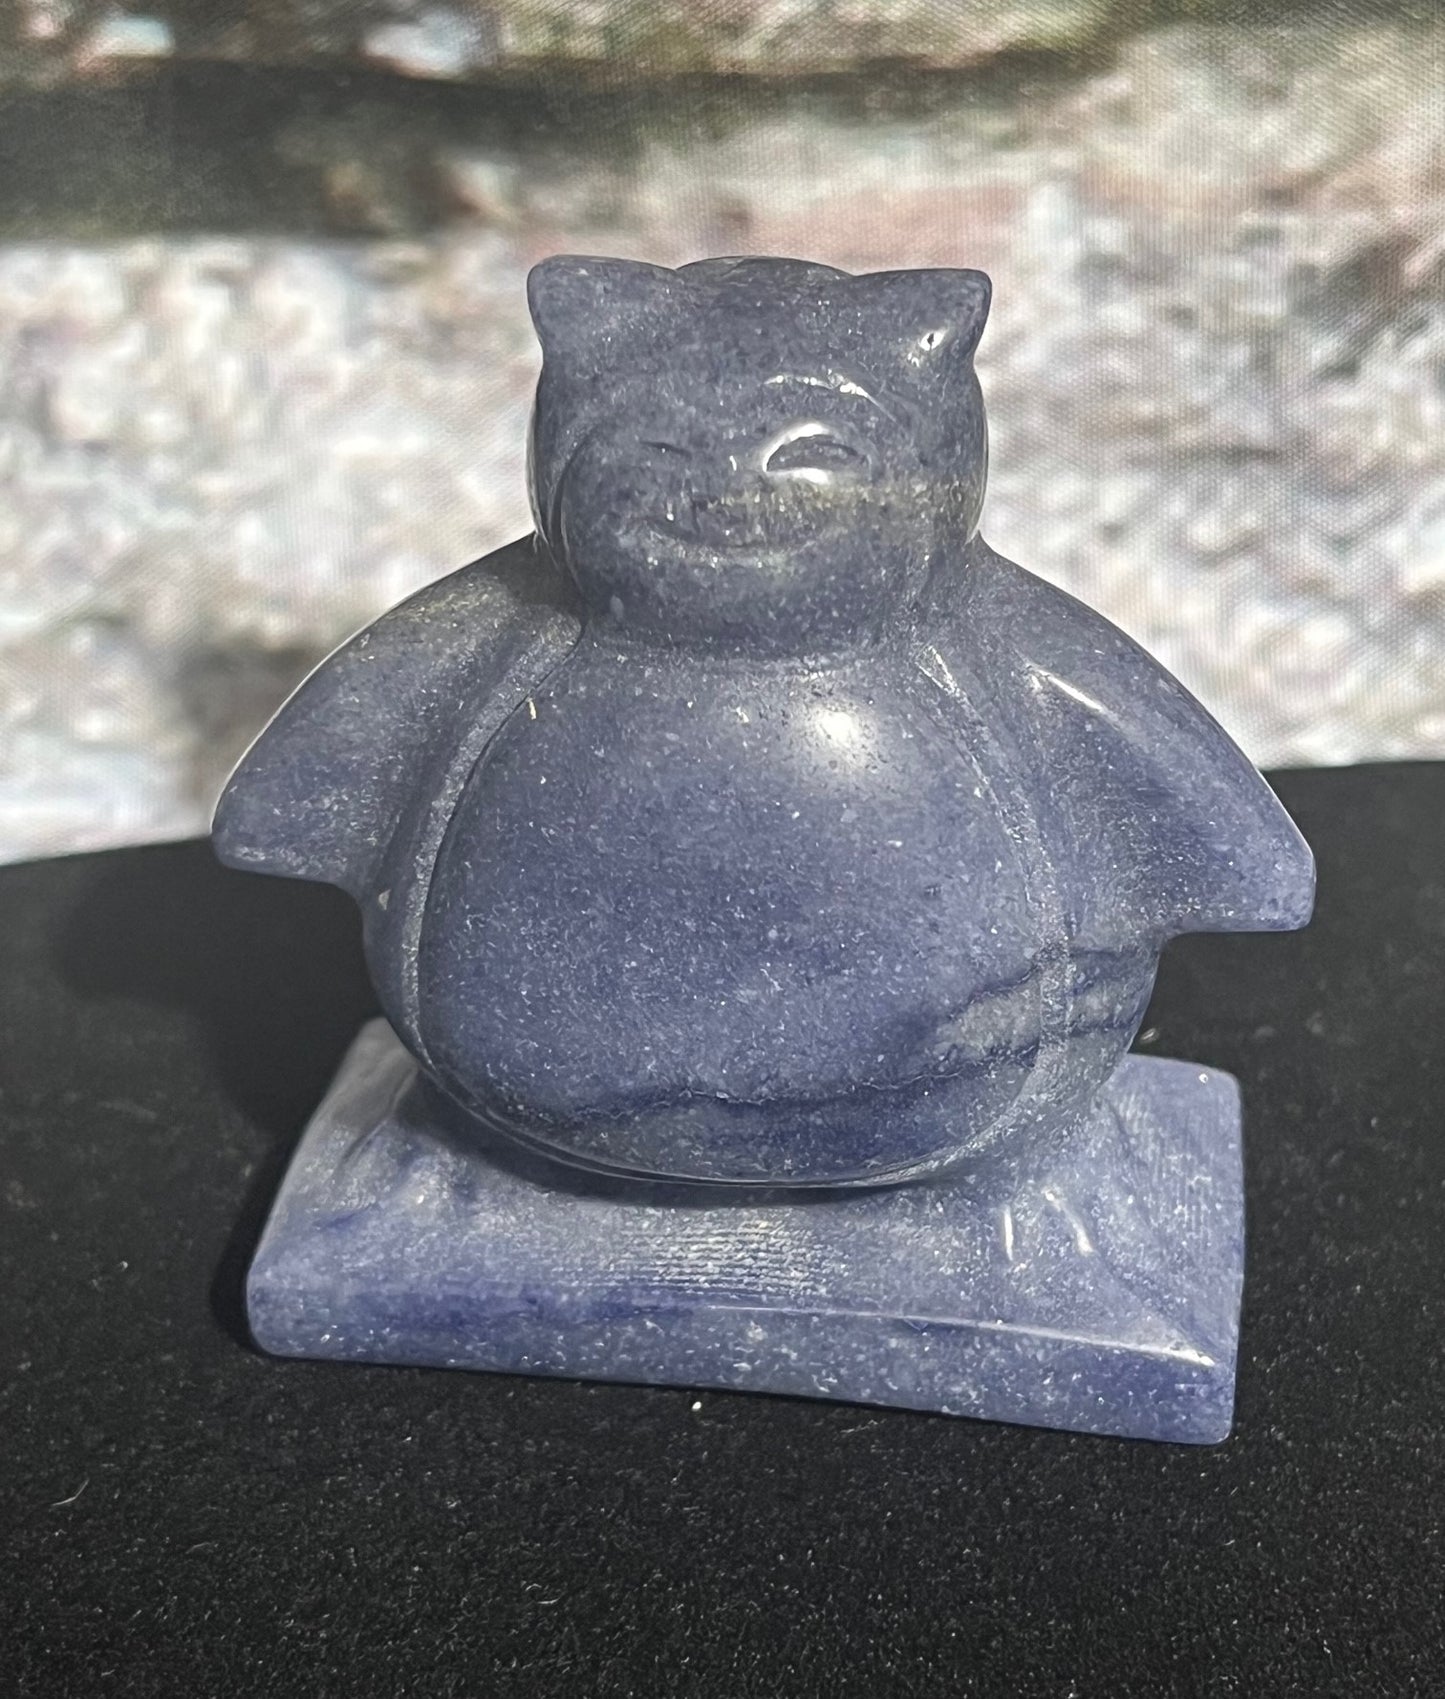 Anime fat cat stone/crystal carving